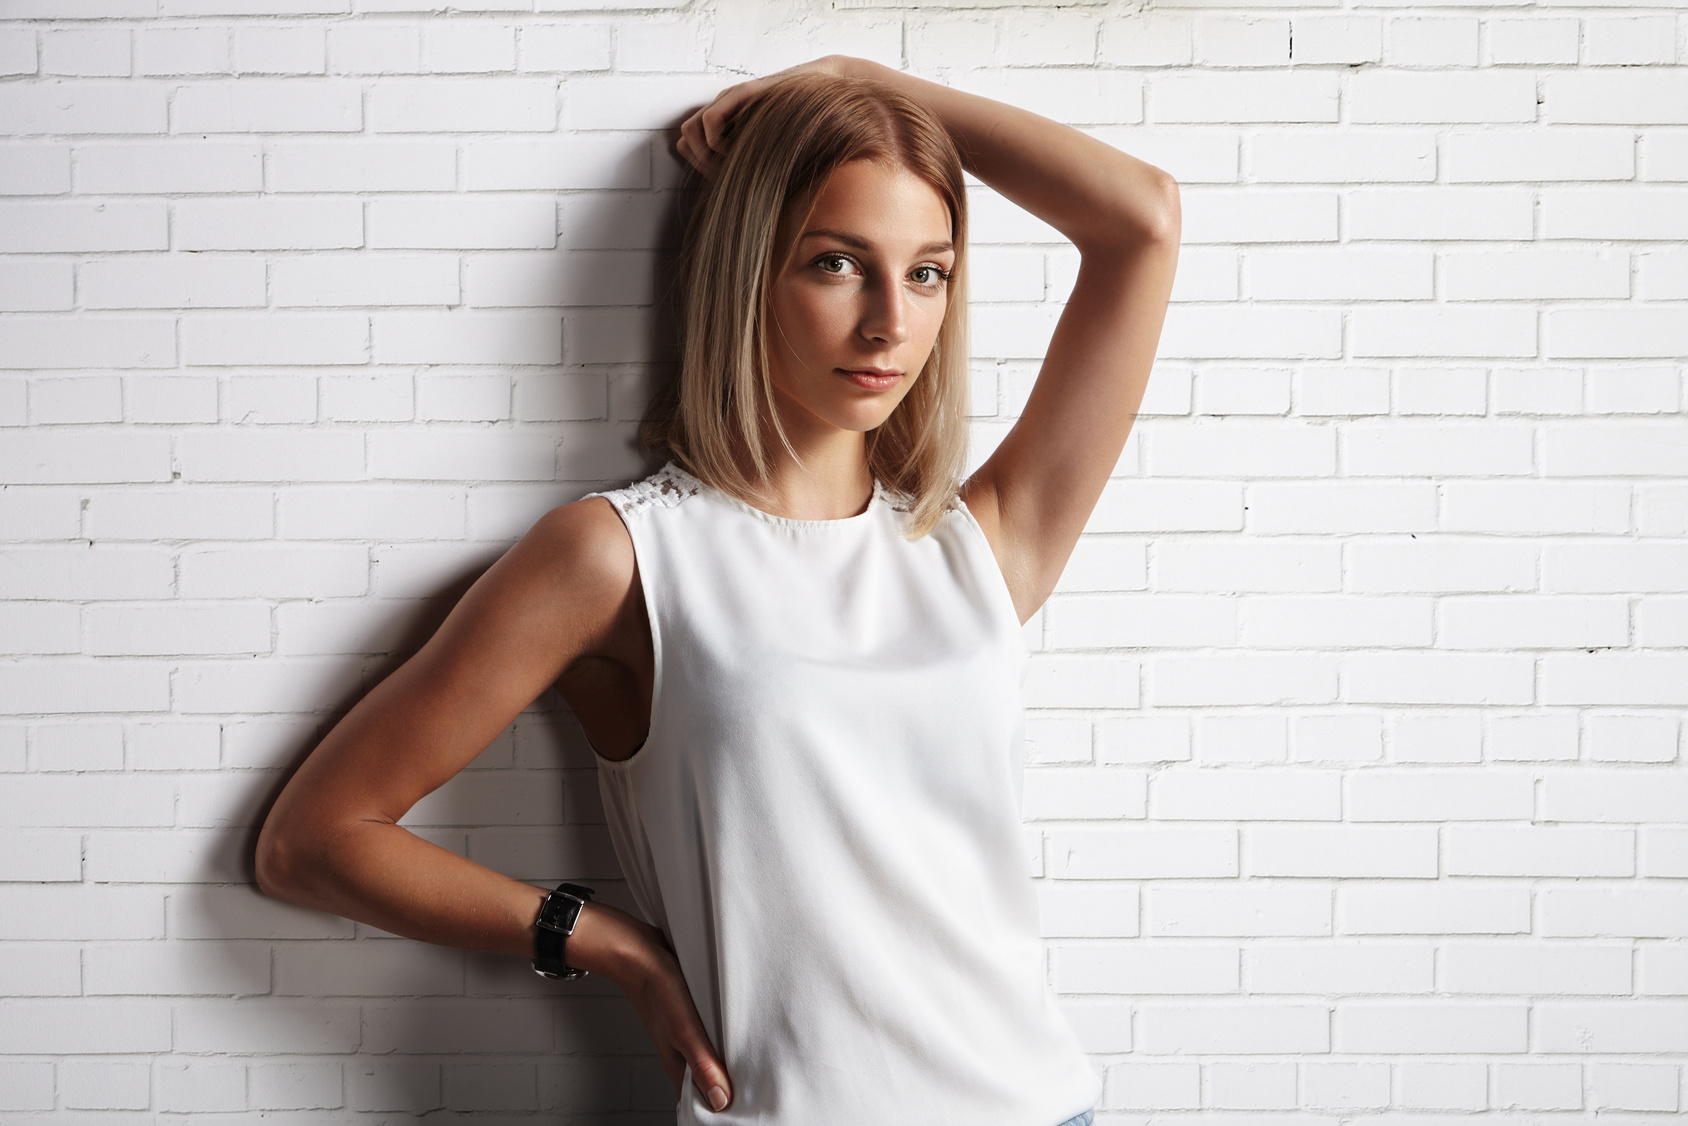 woman in a blank t-shirt. brick wall background